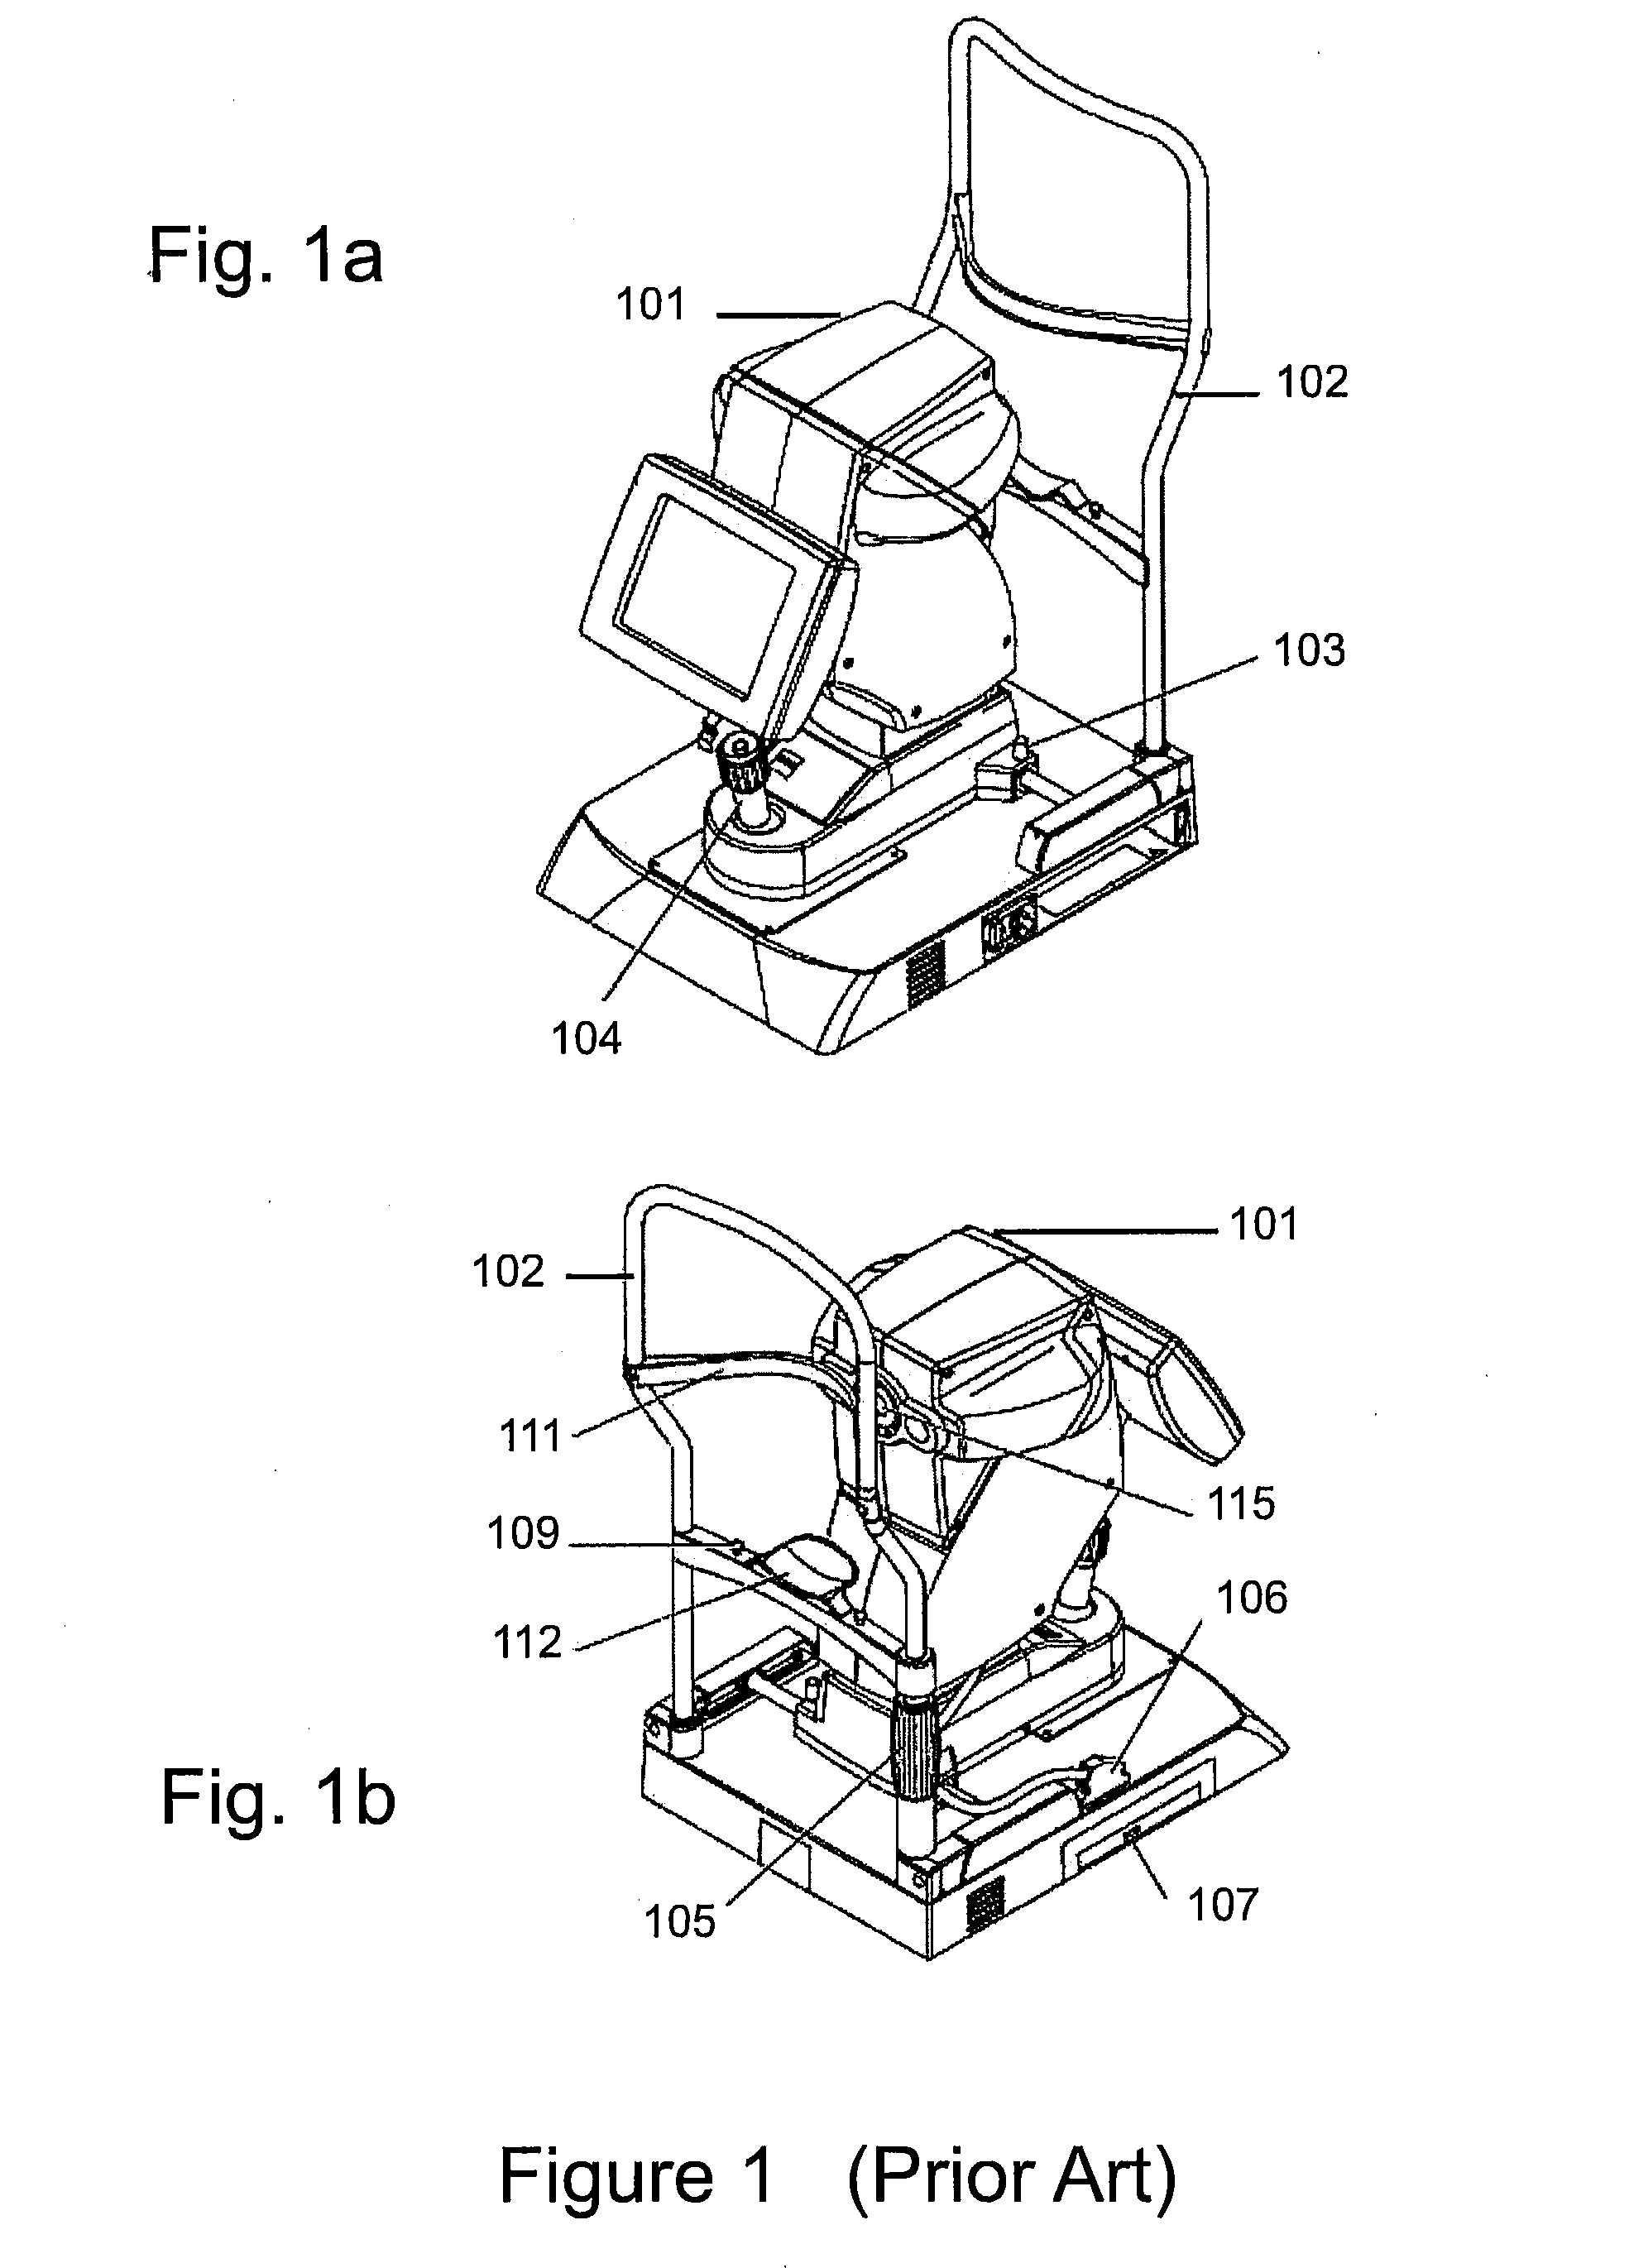 Method of positioning a patient for medical procedures